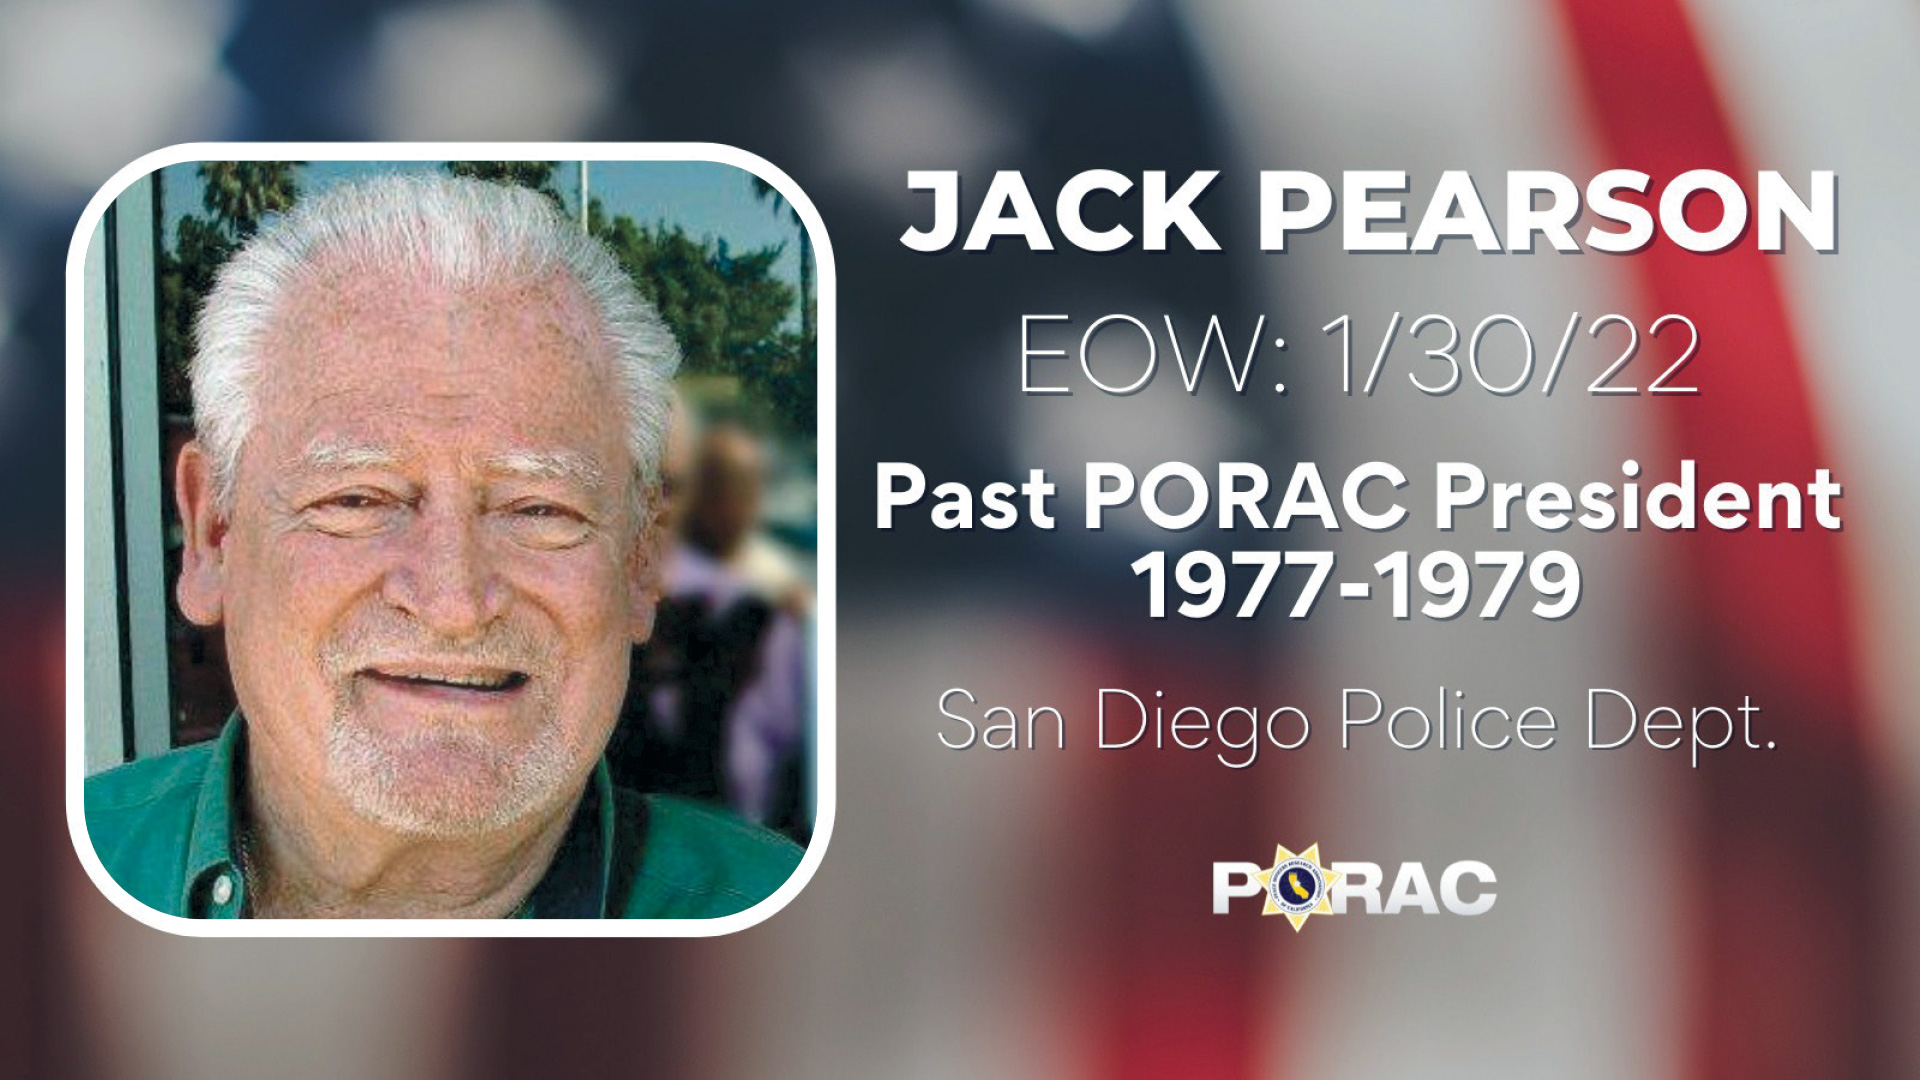 Remembering Past Presidents: Jack Pearson